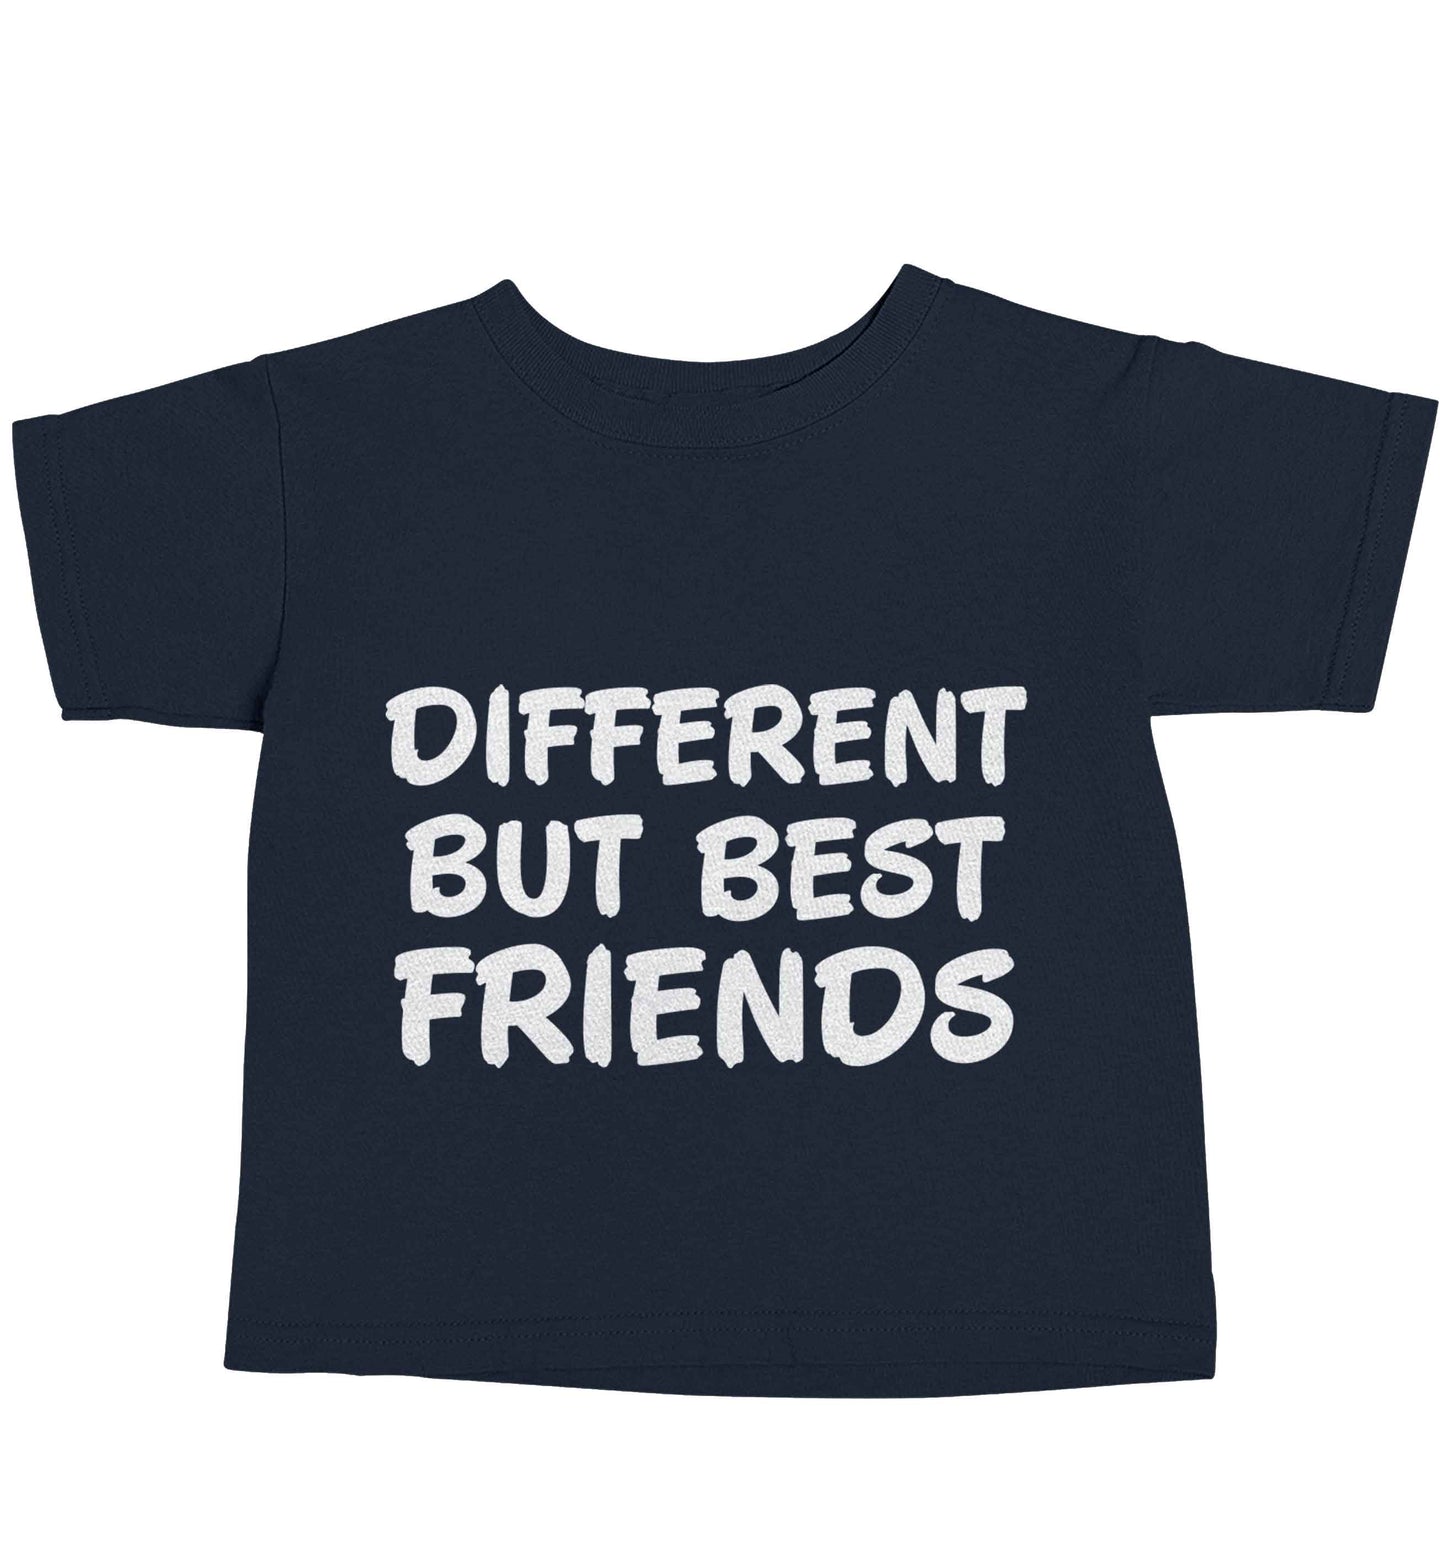 Different but best friends navy baby toddler Tshirt 2 Years